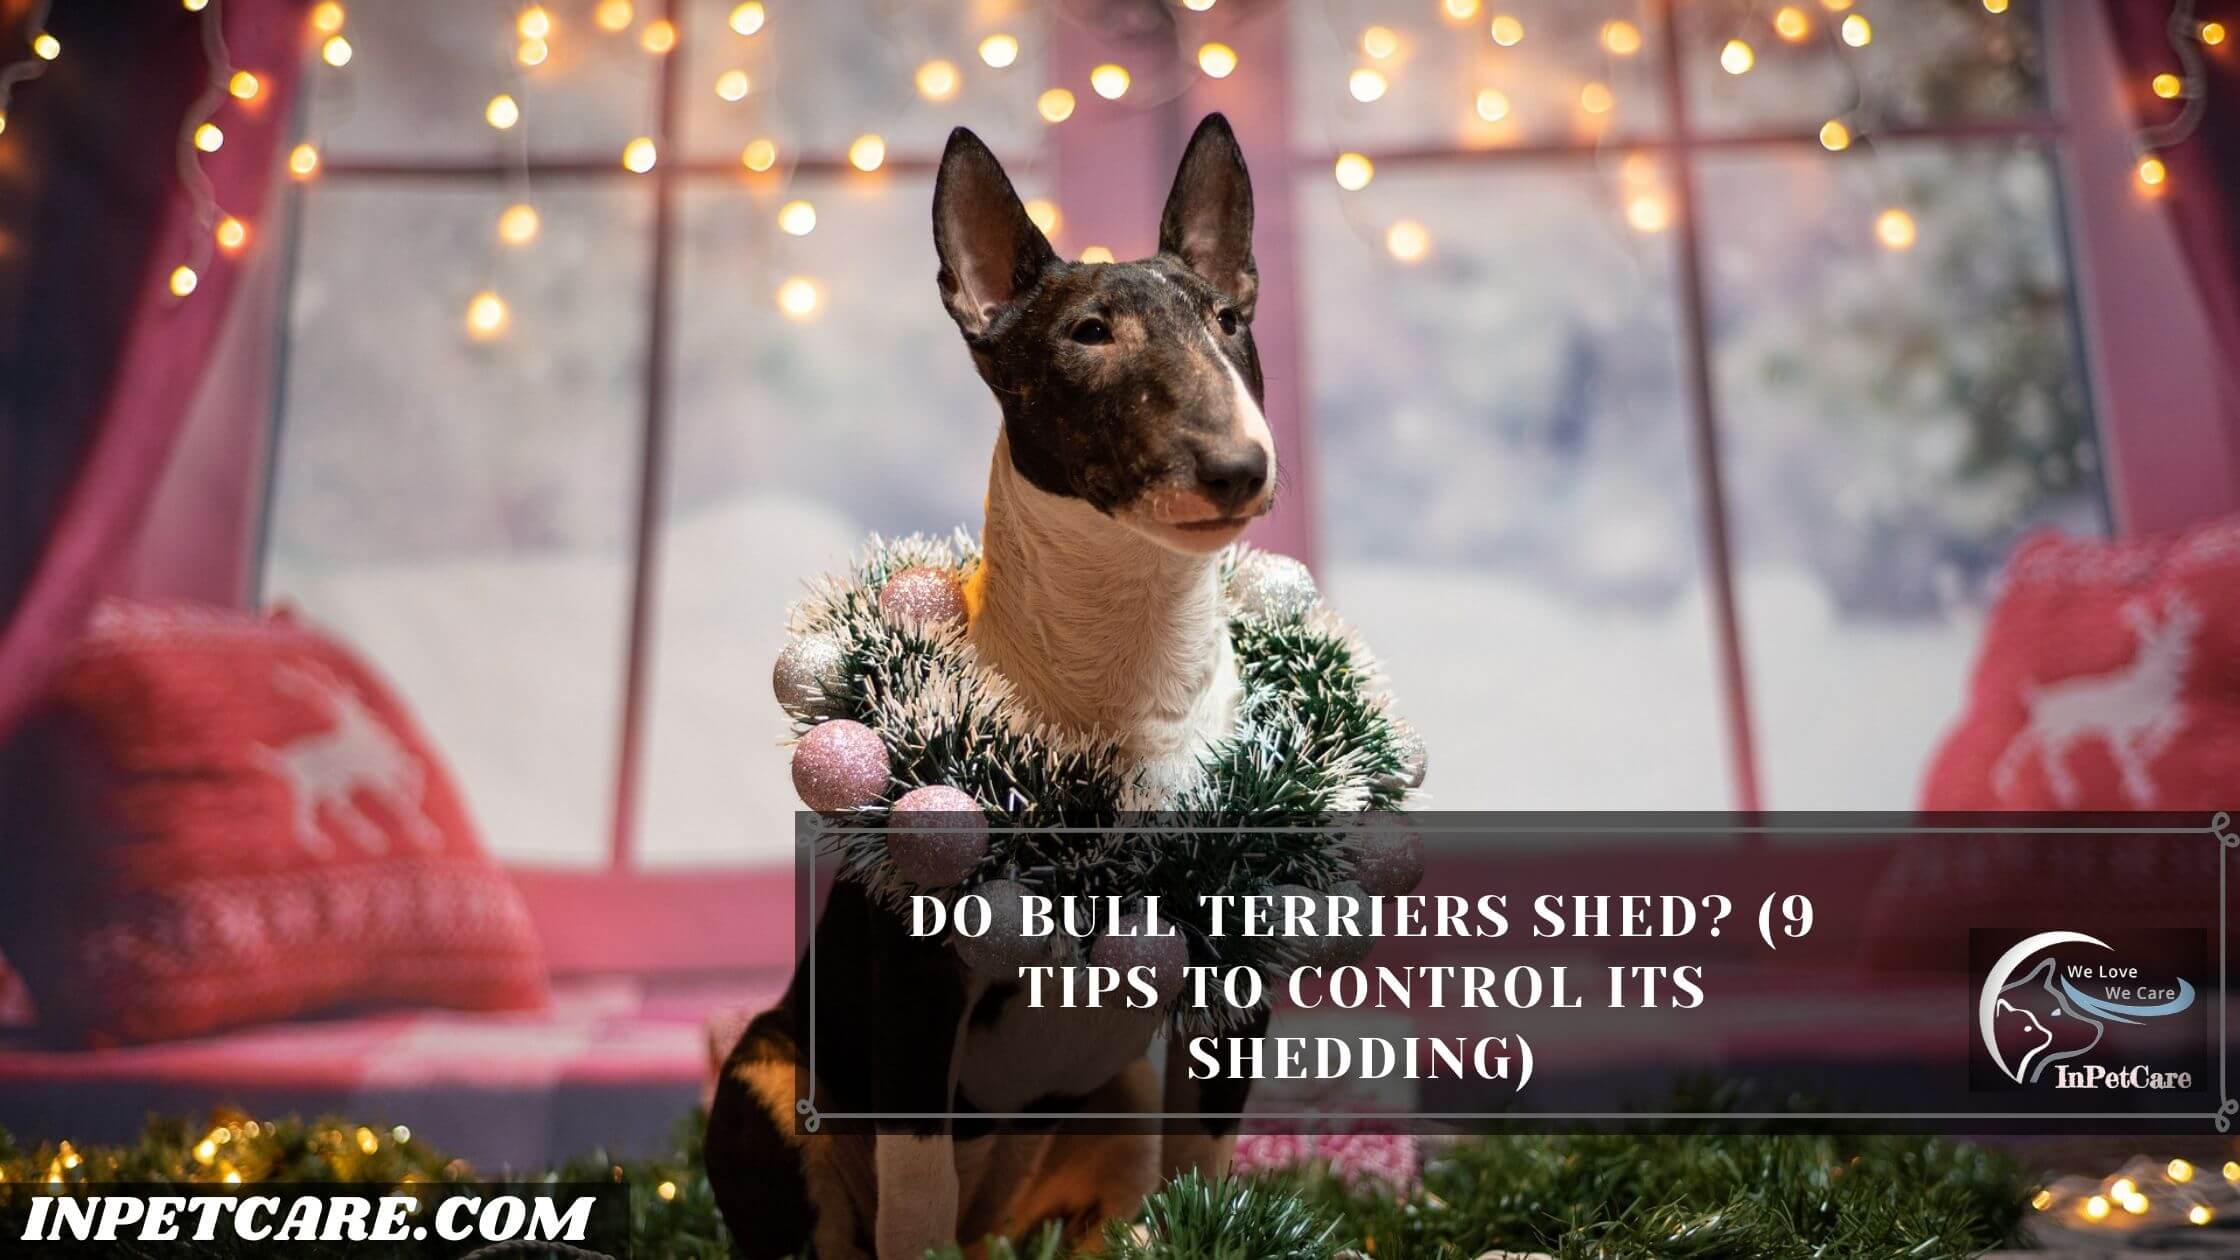 Do Bull Terriers Shed? (9 Tips To Control Its Shedding)